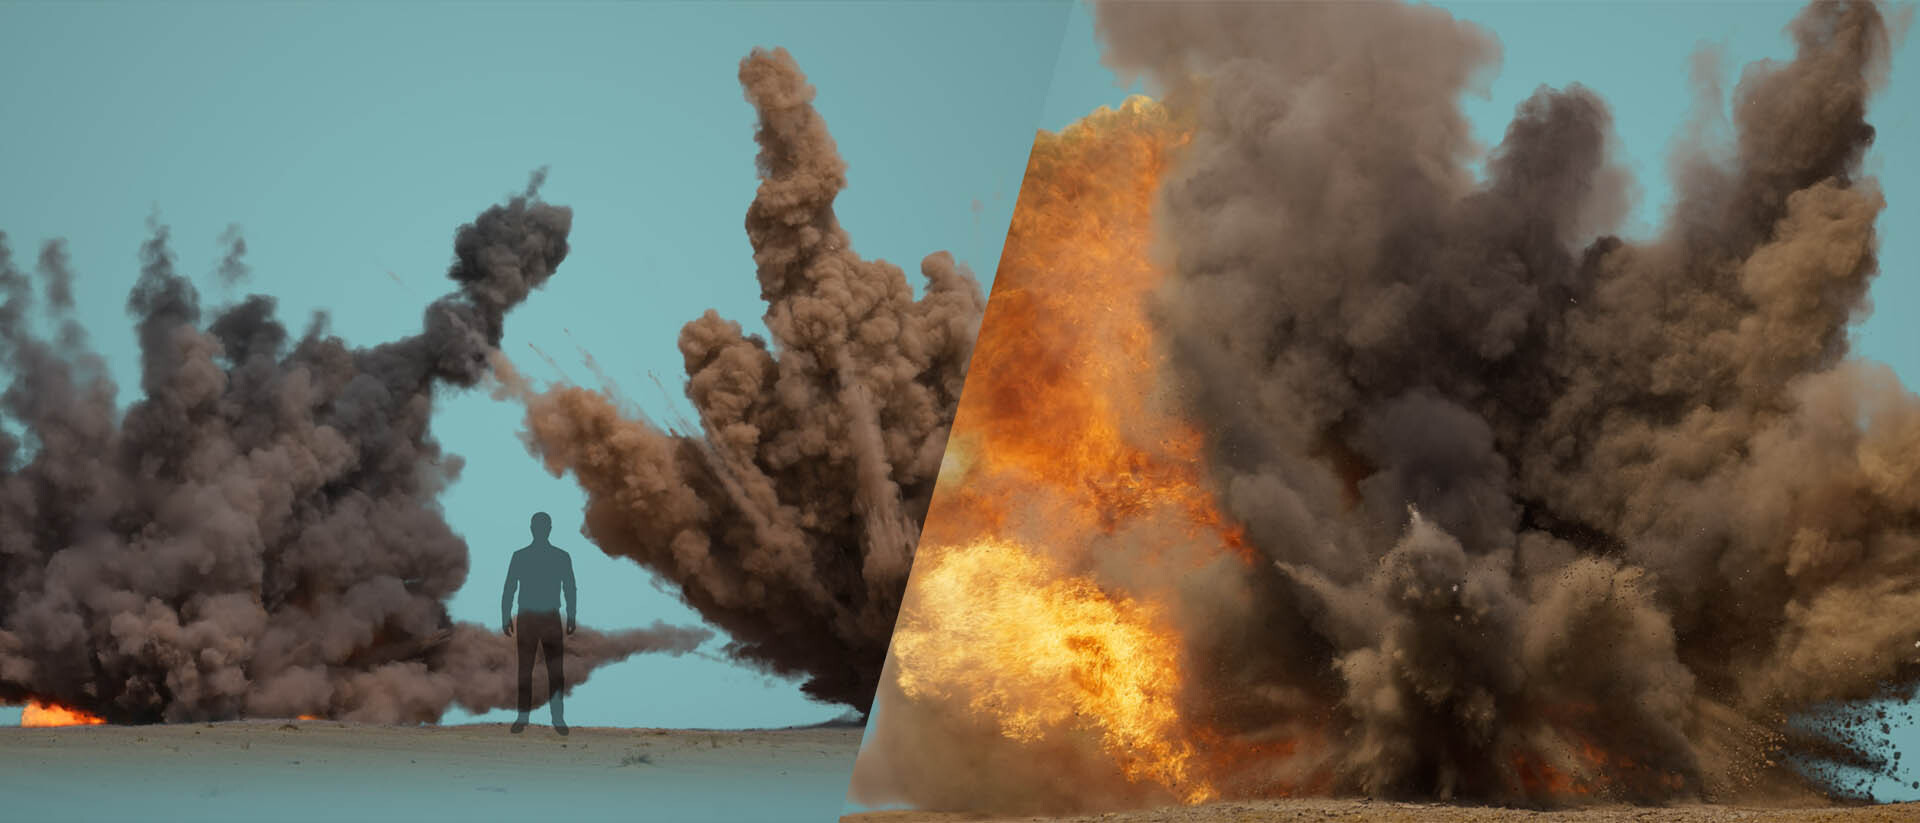 Just released! Dust Explosions Vol. 2 and Dust Explosion Close-Ups VFX Collections